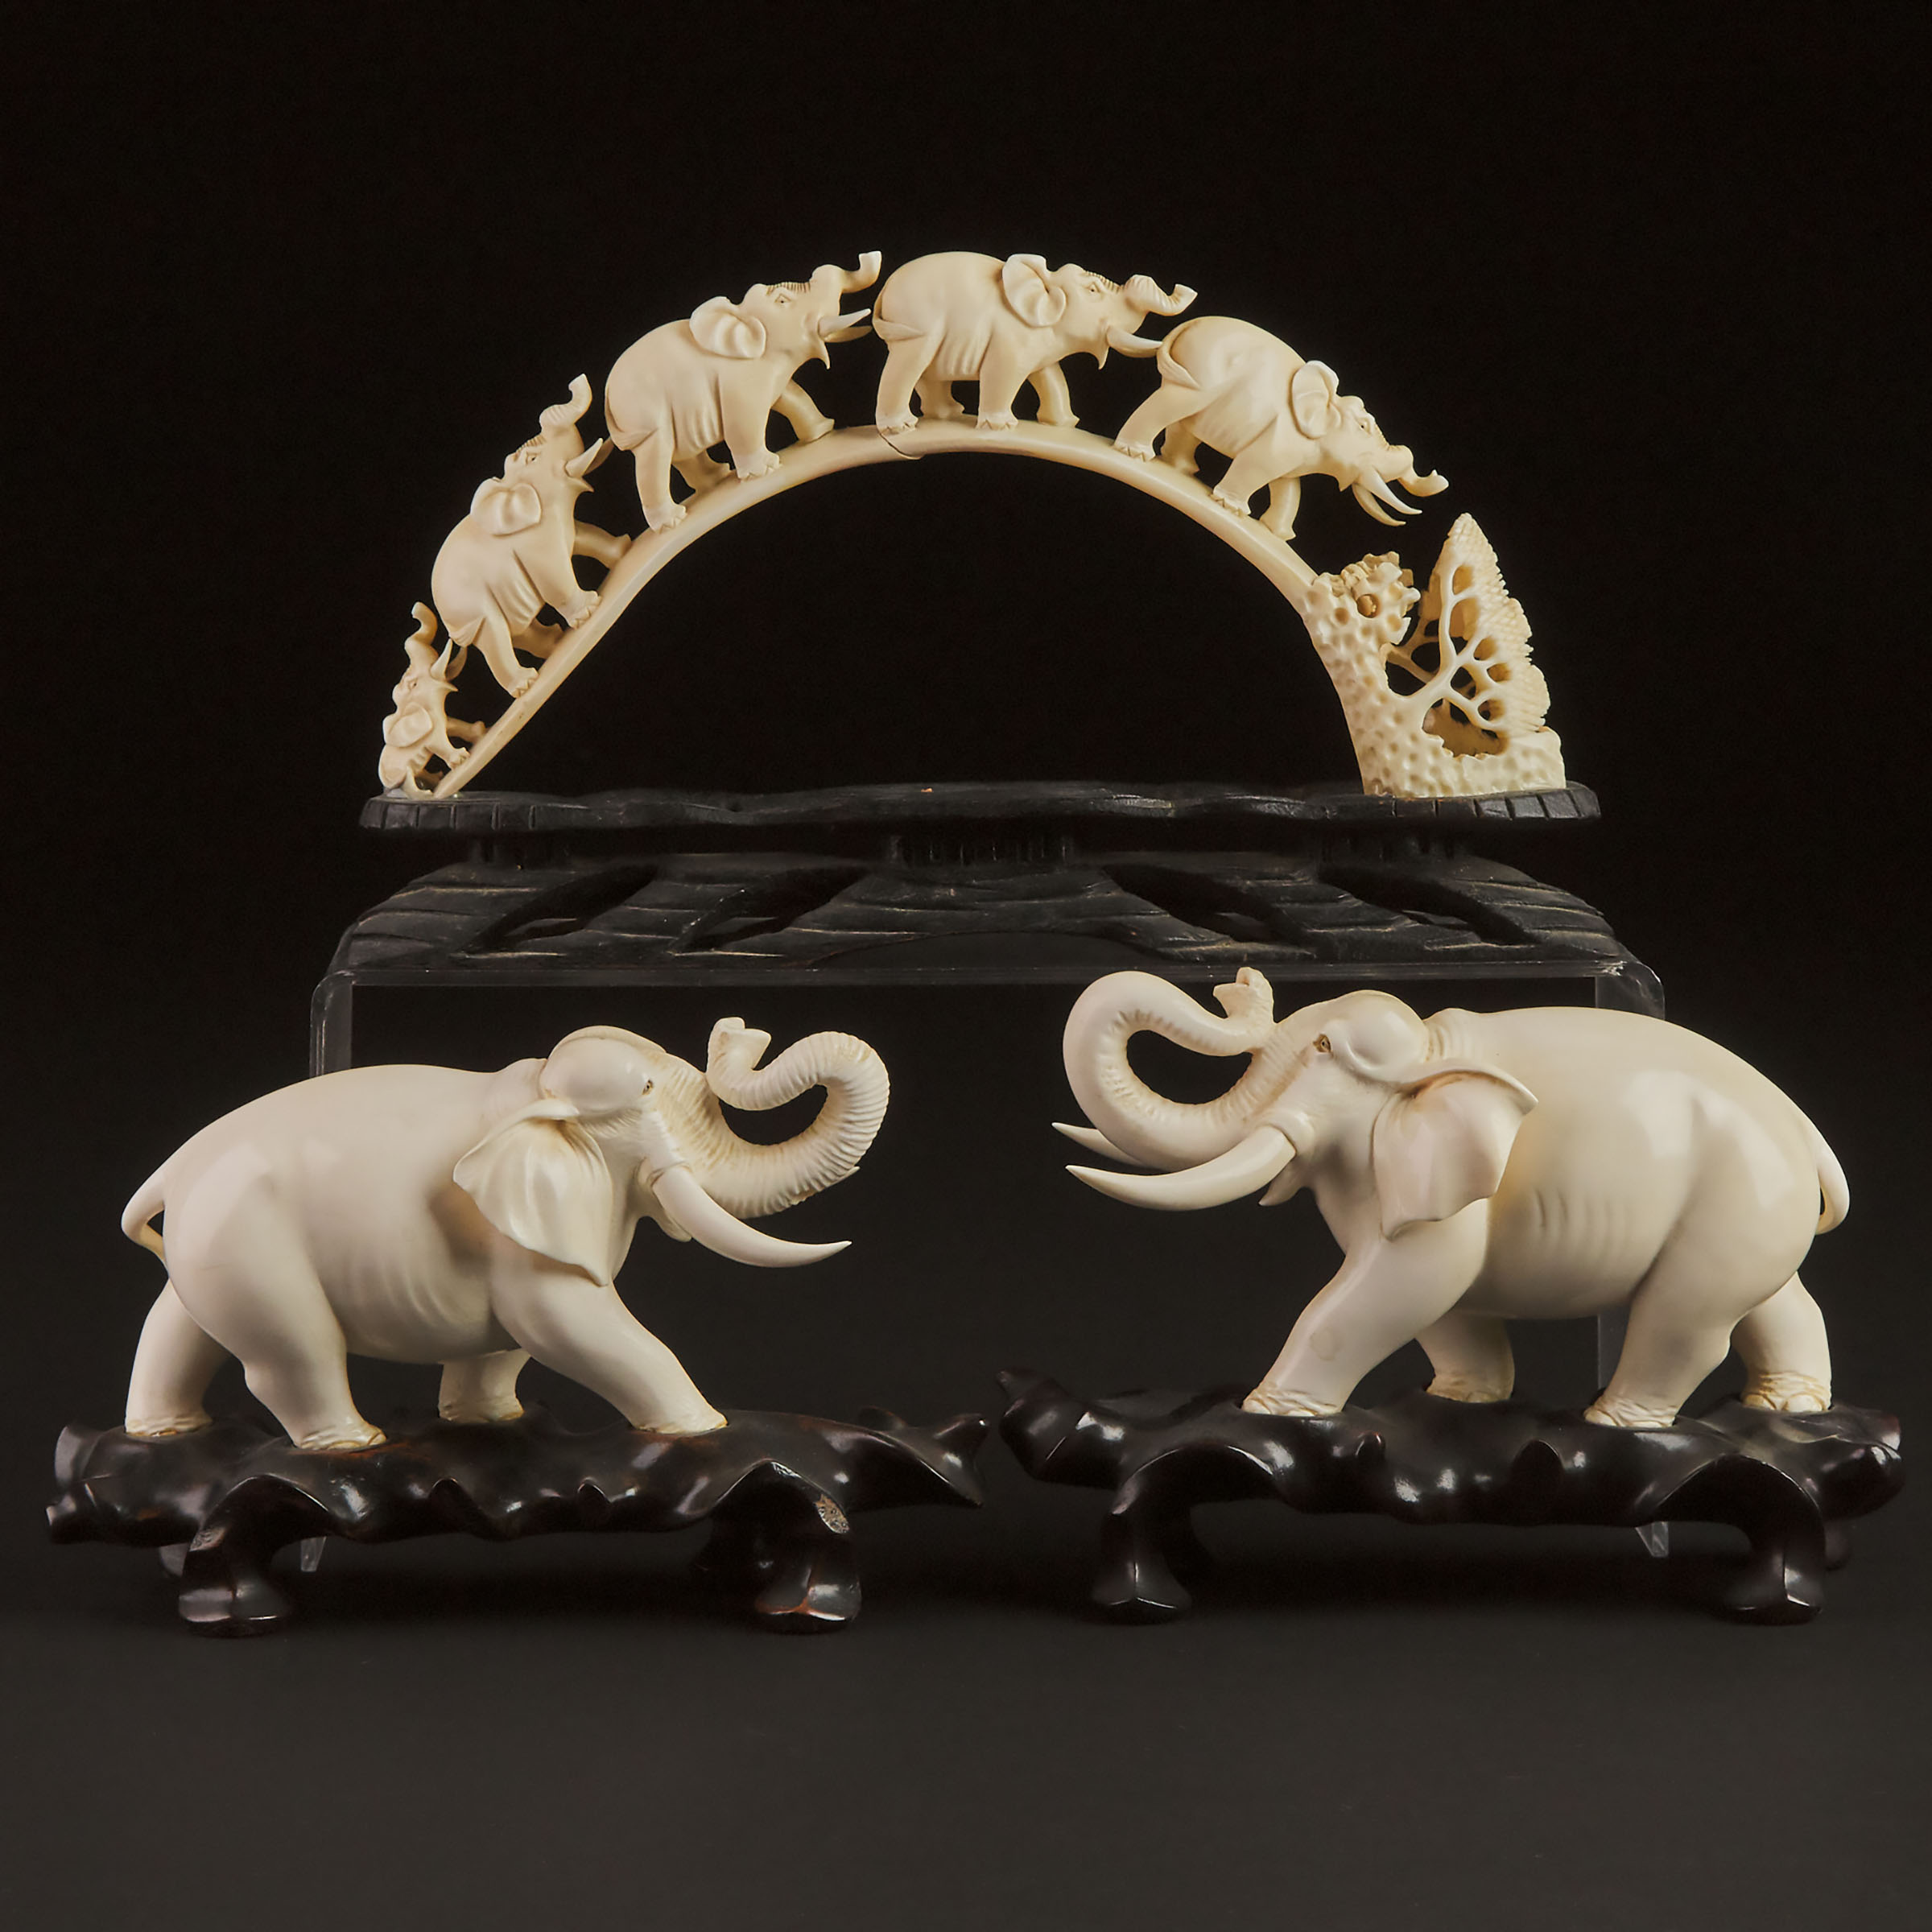 A Pair of Ivory Figures of Elephants, Together With a Tusk-Form Procession, Early to Mid 20th Century